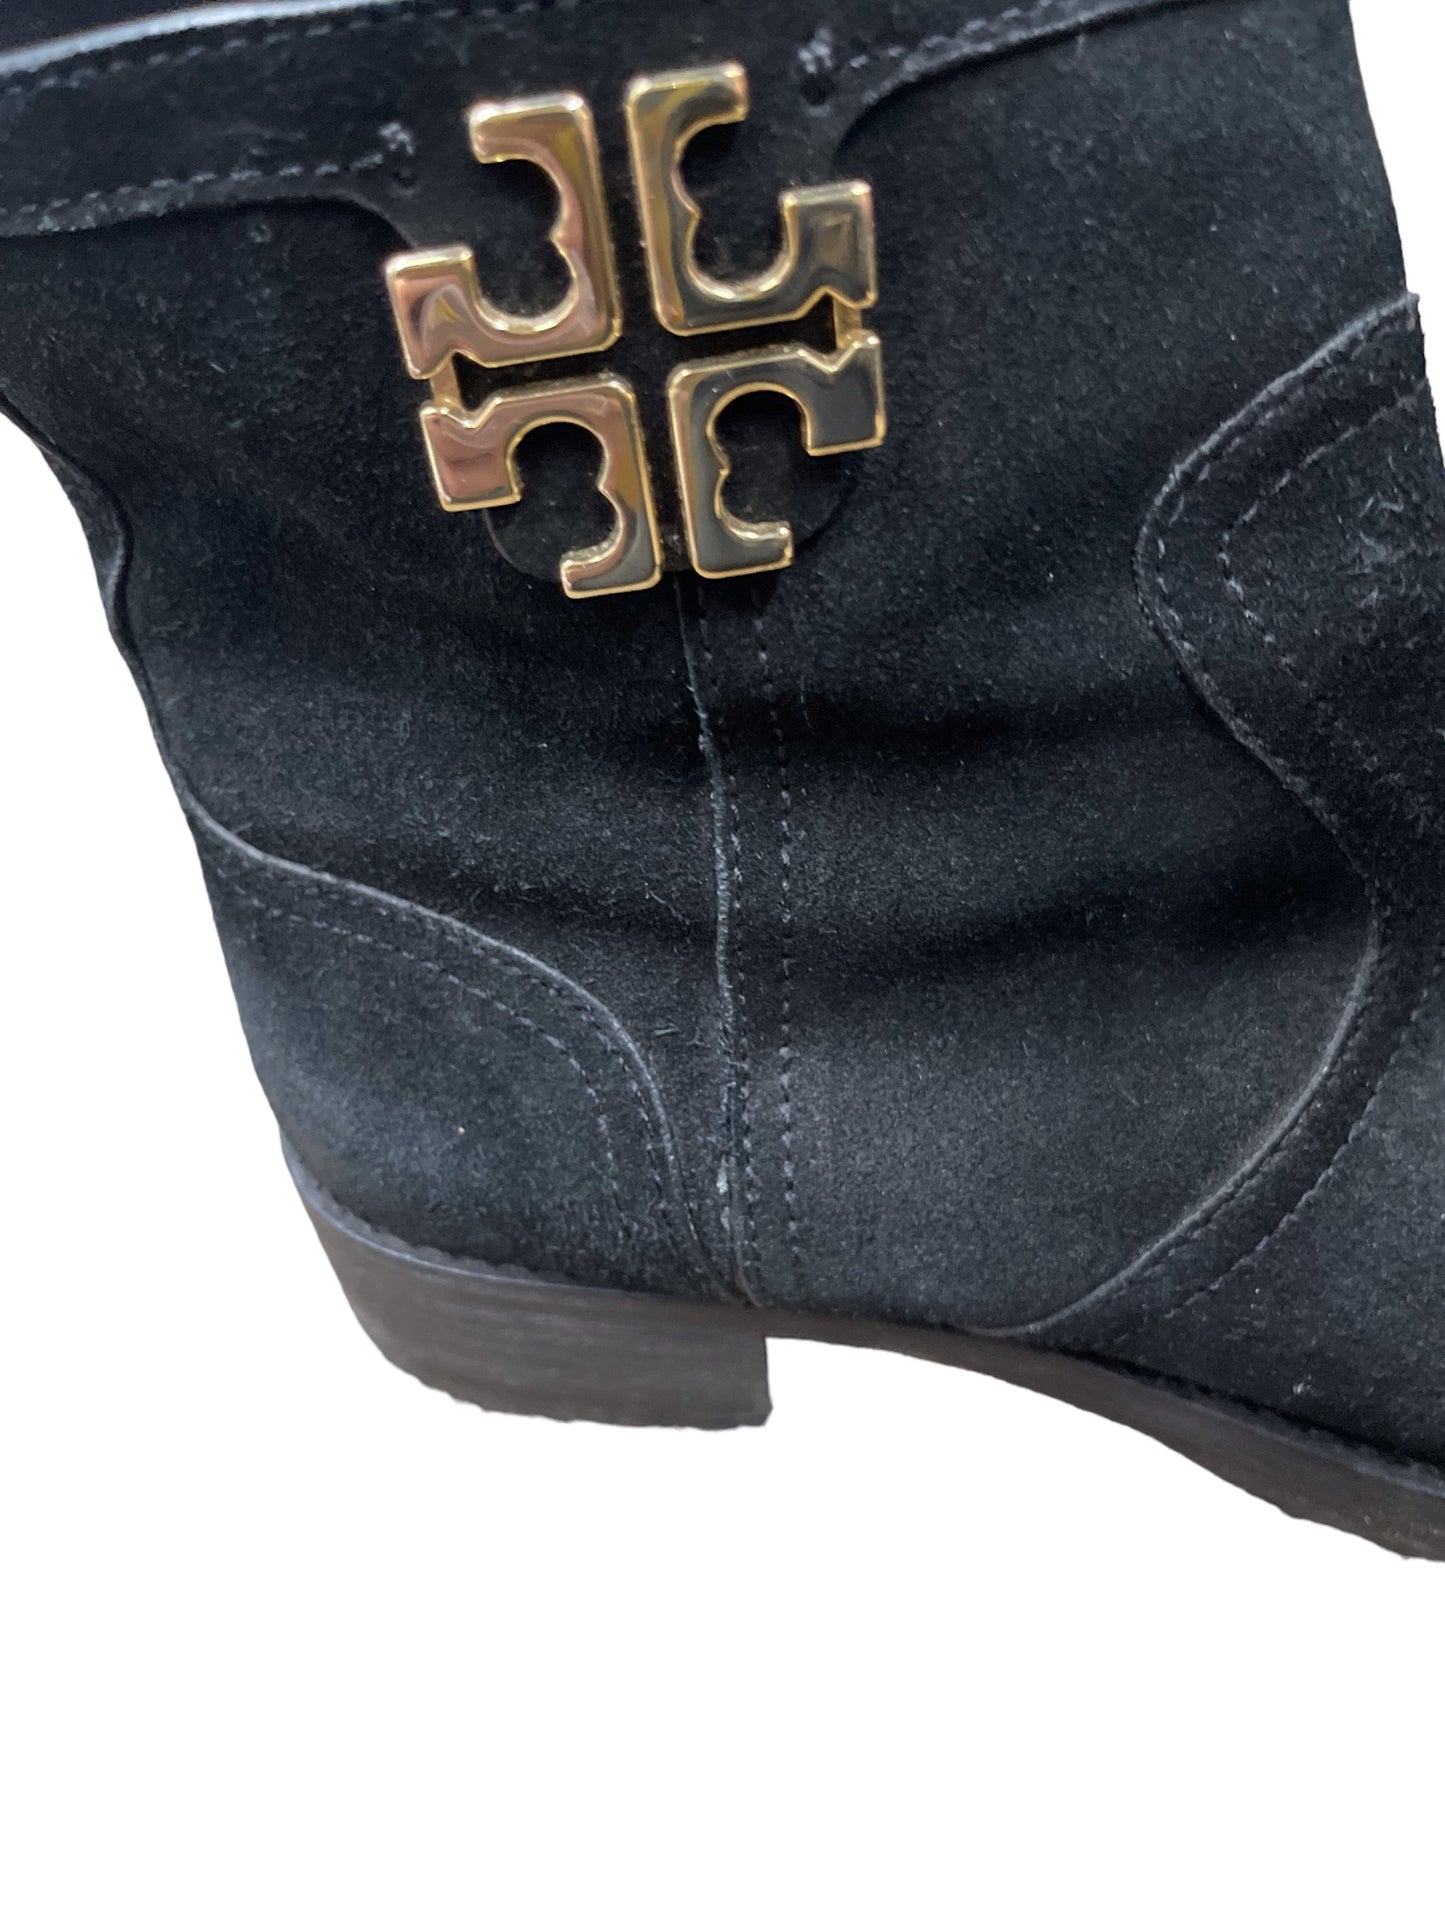 Boots Ankle Flats By Tory Burch  Size: 9